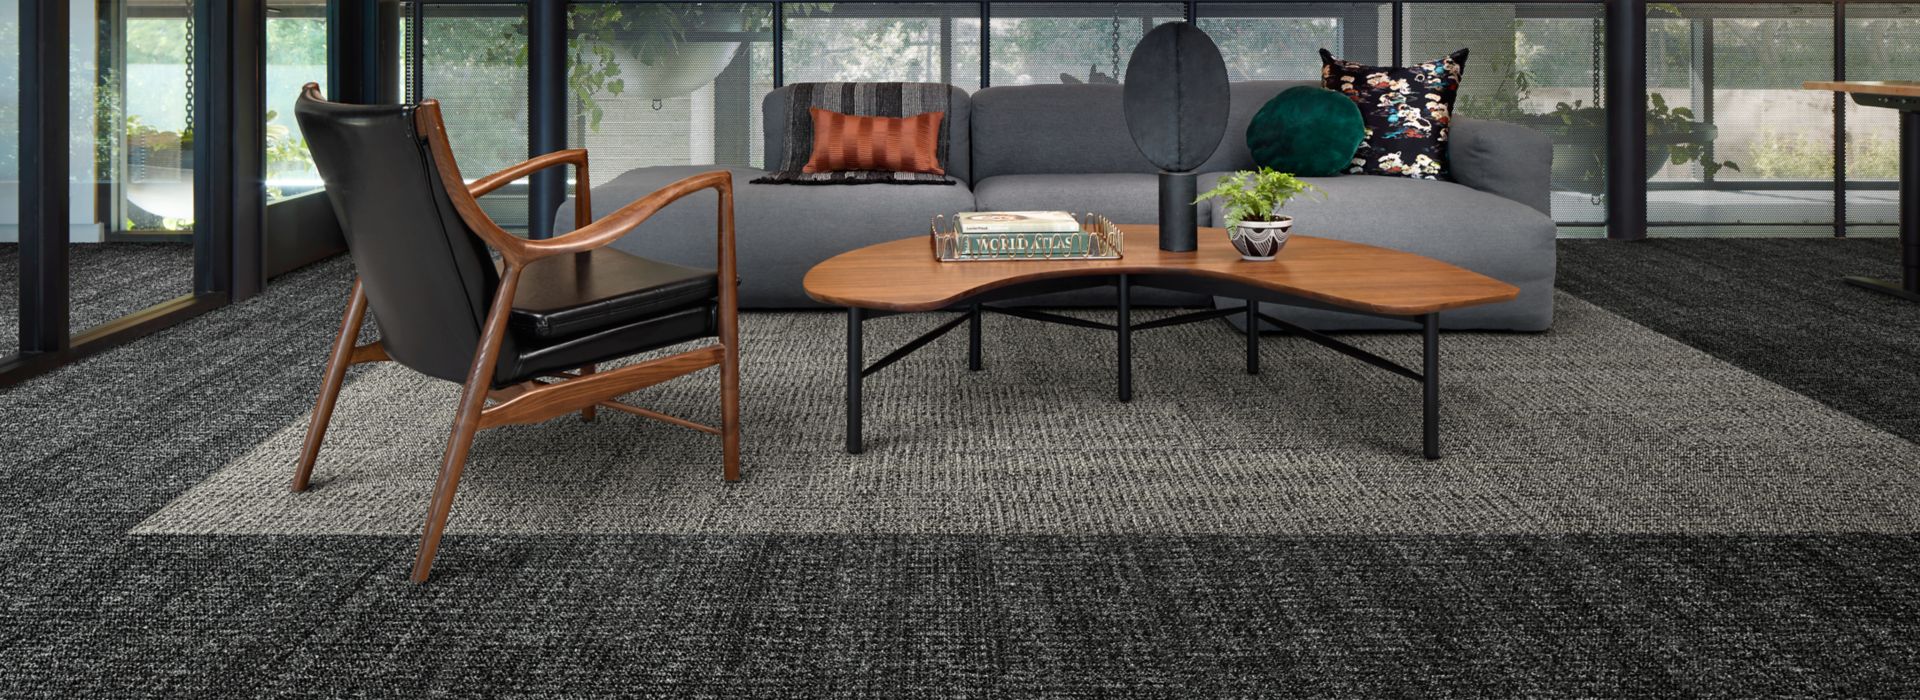 Interface Diddley Dot plank carpet tile in lobby